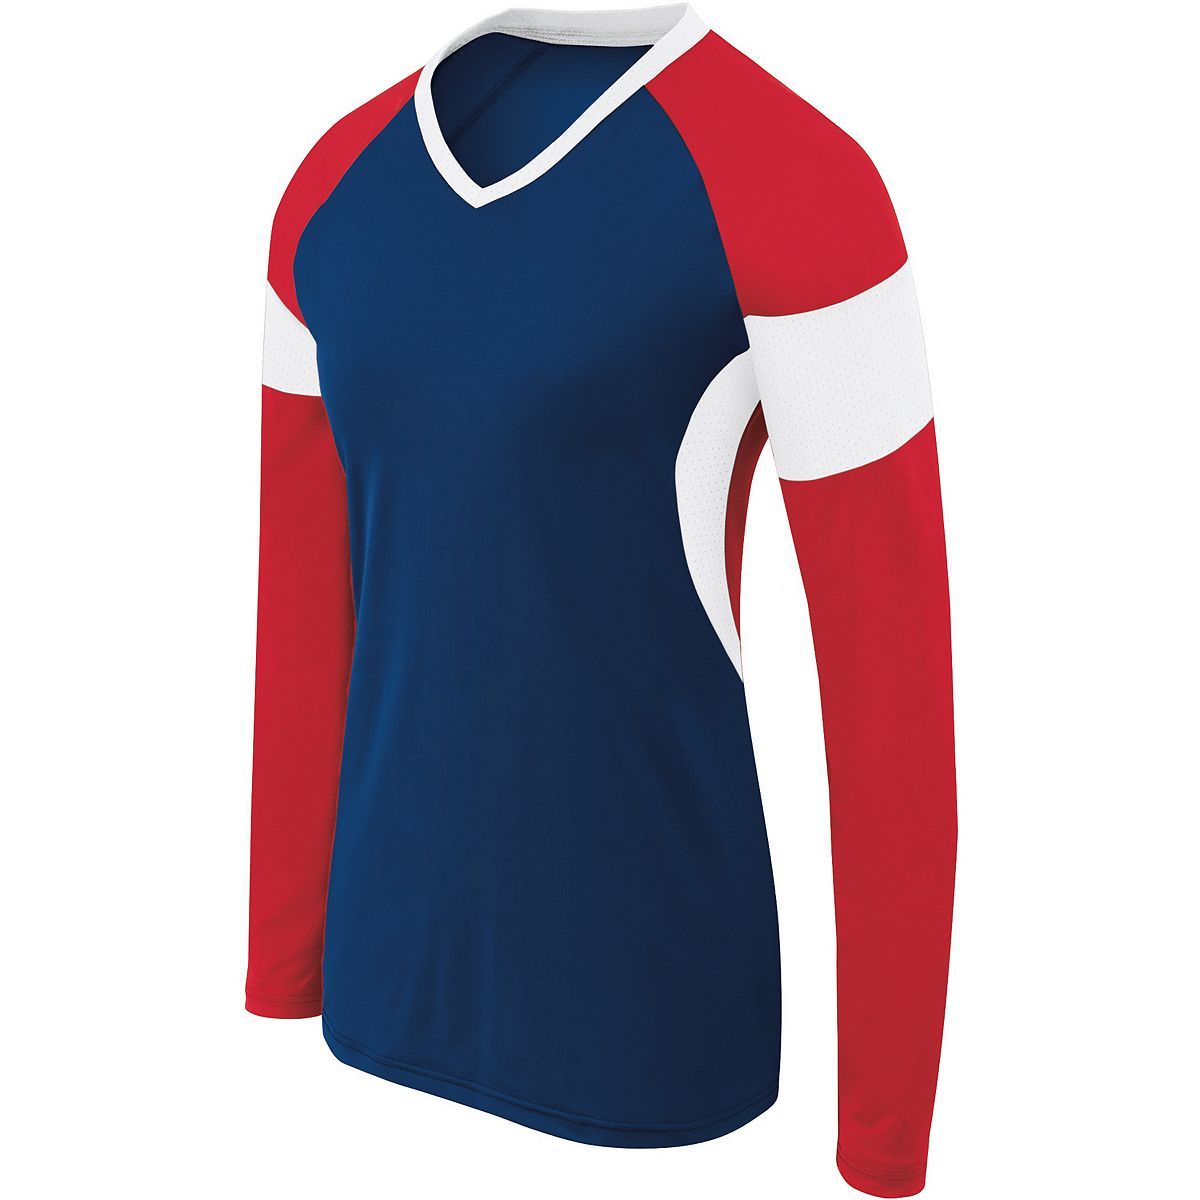 High 5 Ladies Long Sleeve Raptor Jersey in Navy/Scarlet/White  -Part of the Ladies, Ladies-Jersey, High5-Products, Volleyball, Shirts product lines at KanaleyCreations.com